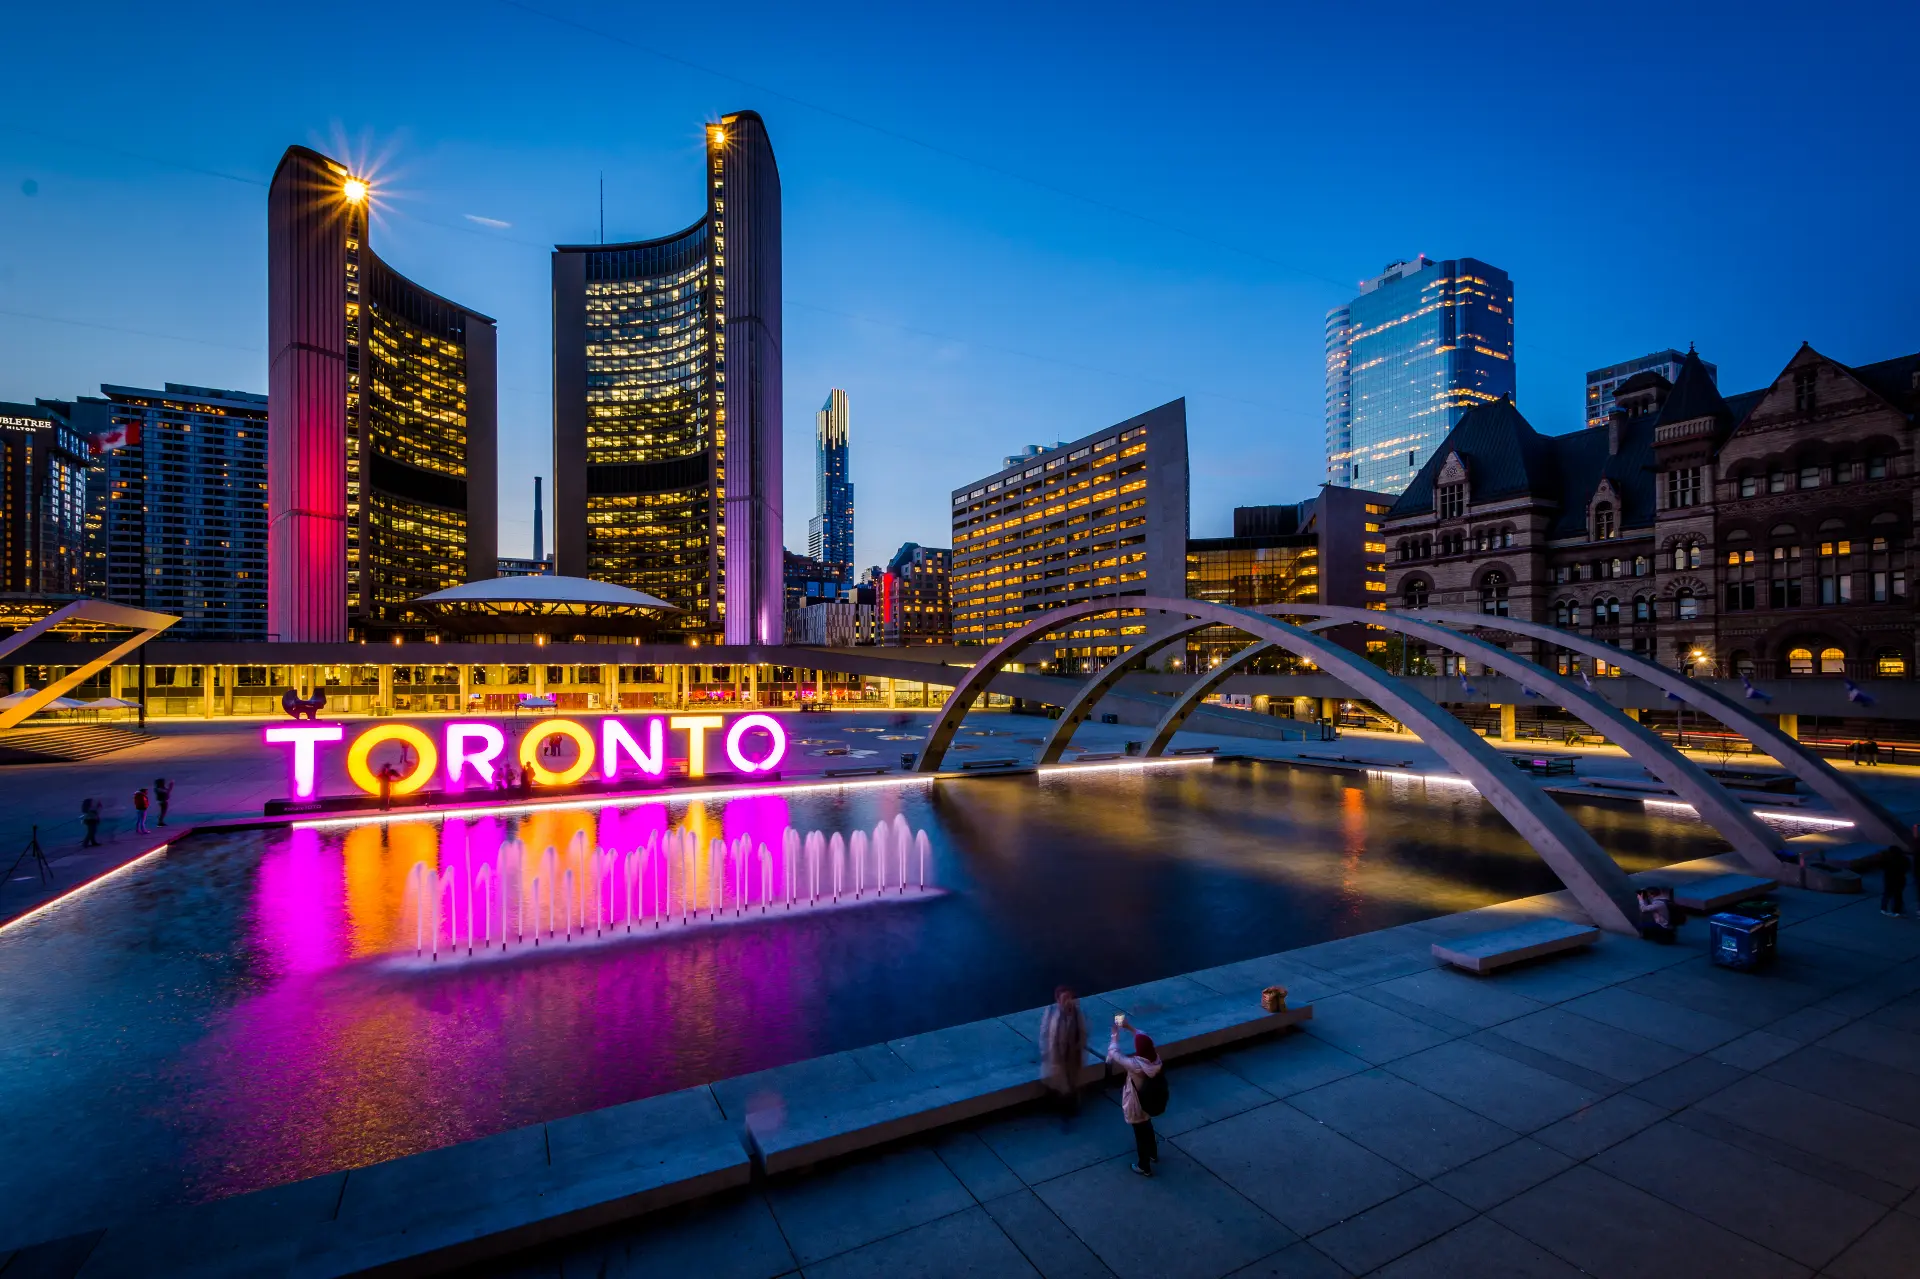 An evening picture of Toronto city hall with both the lighted Toronto logo and an artificial pond in the foreground, in the who we are section.